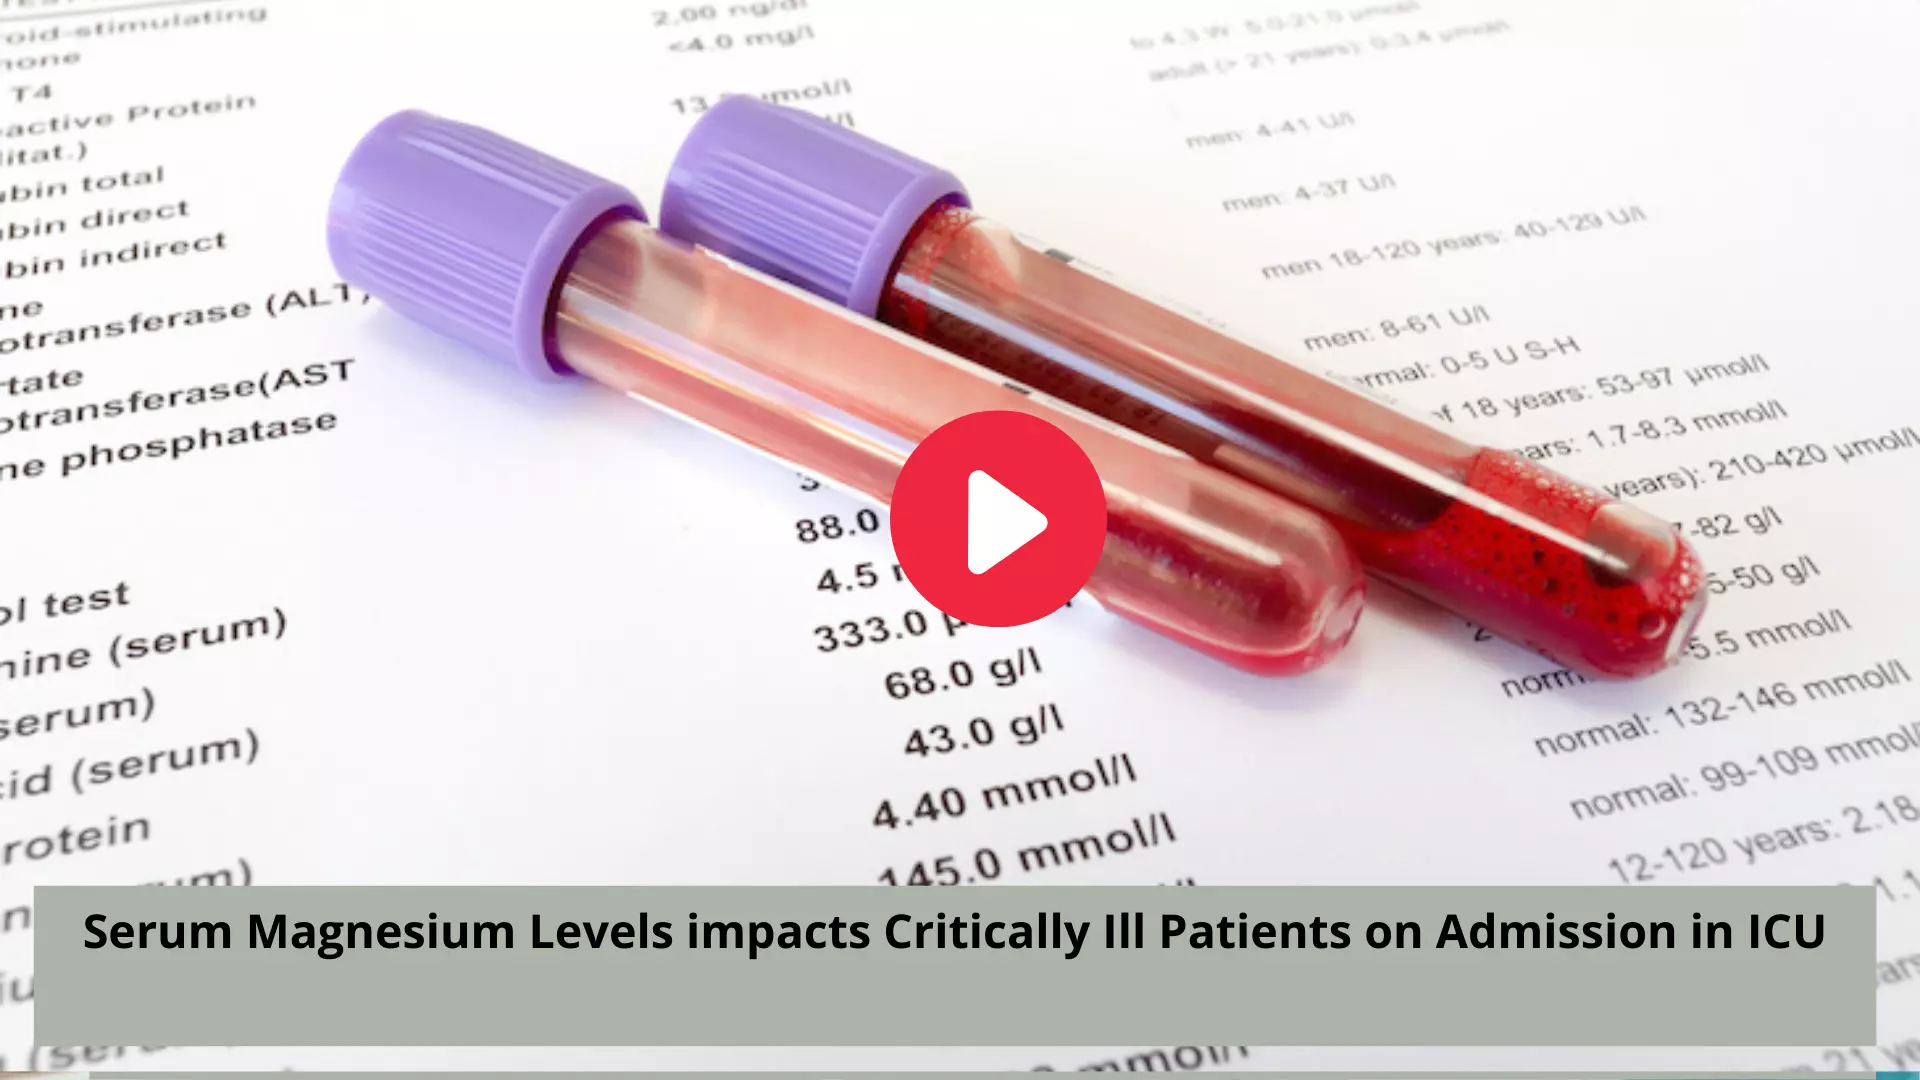 Serum Magnesium Levels impacts Critically Ill Patients on Admission in ICU